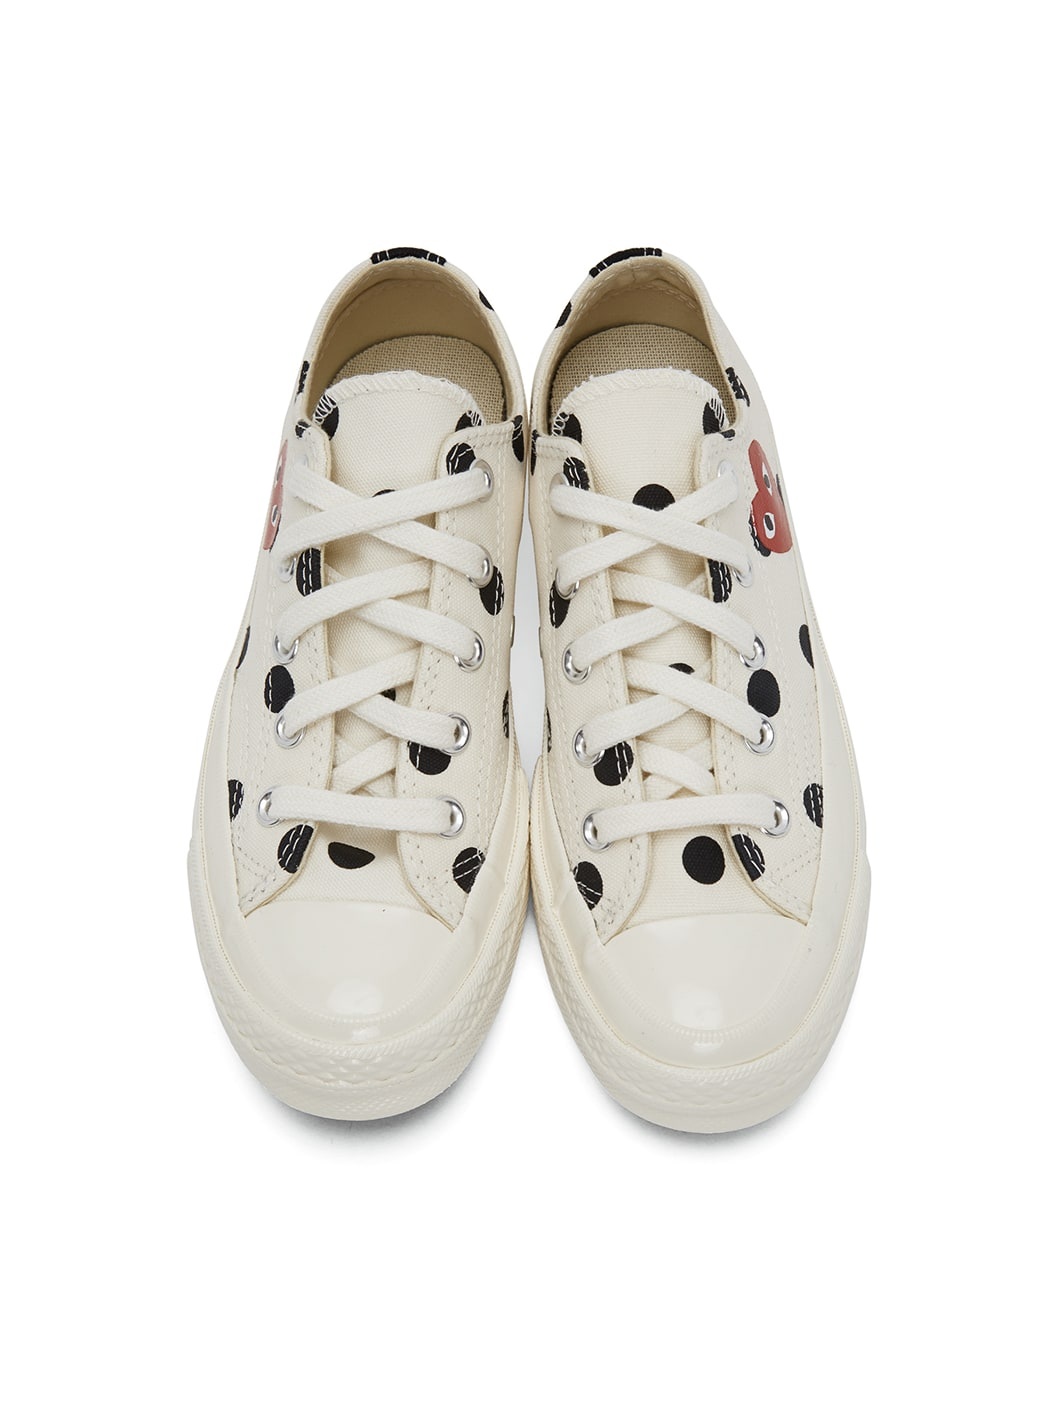 White Converse Edition Polka Dot Heart Chuck 70 Low Sneakers - 5